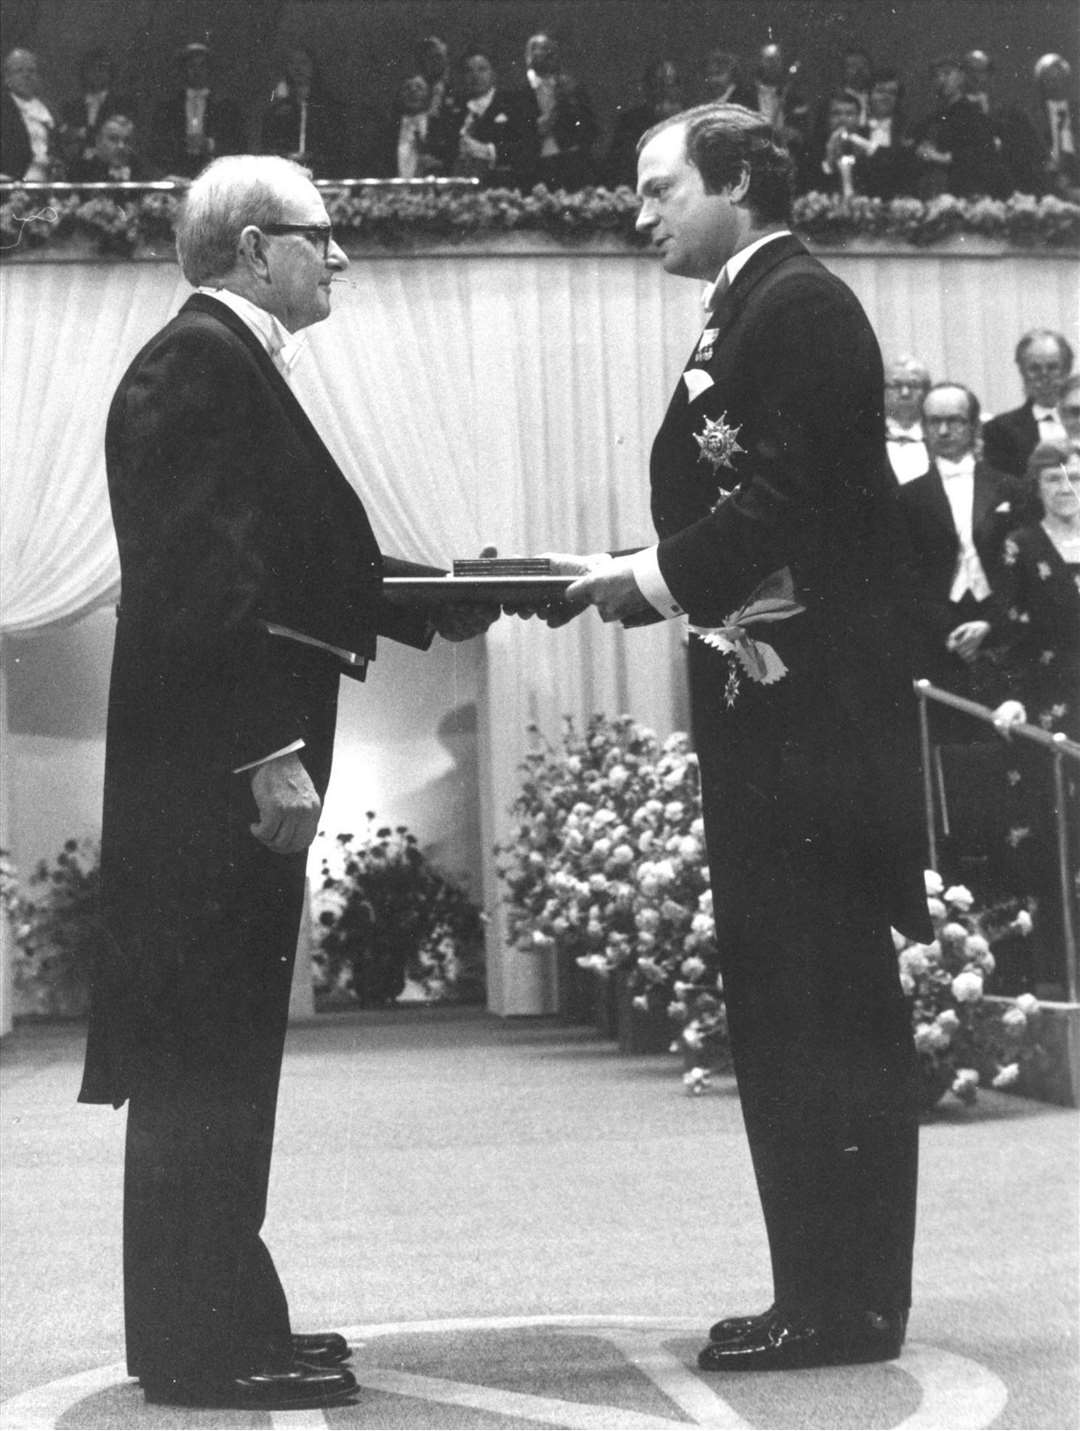 Allan MacLeod Cormack receiving the Nobel Prize from the King of Sweden in December 1979. Picture: Torgny Greitz